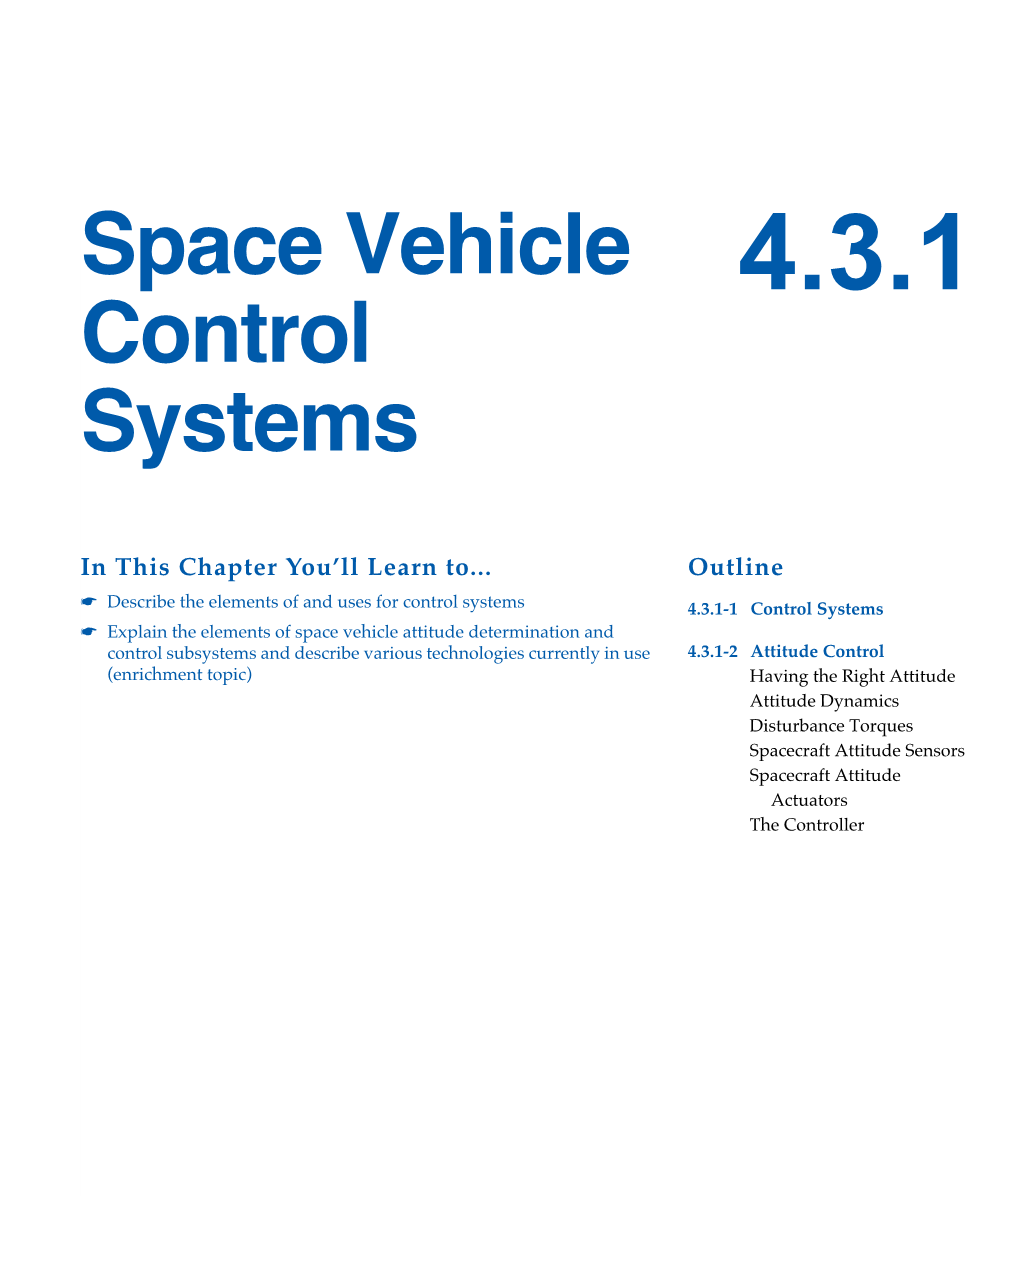 4.3.1 Space Vehicle Control Systems